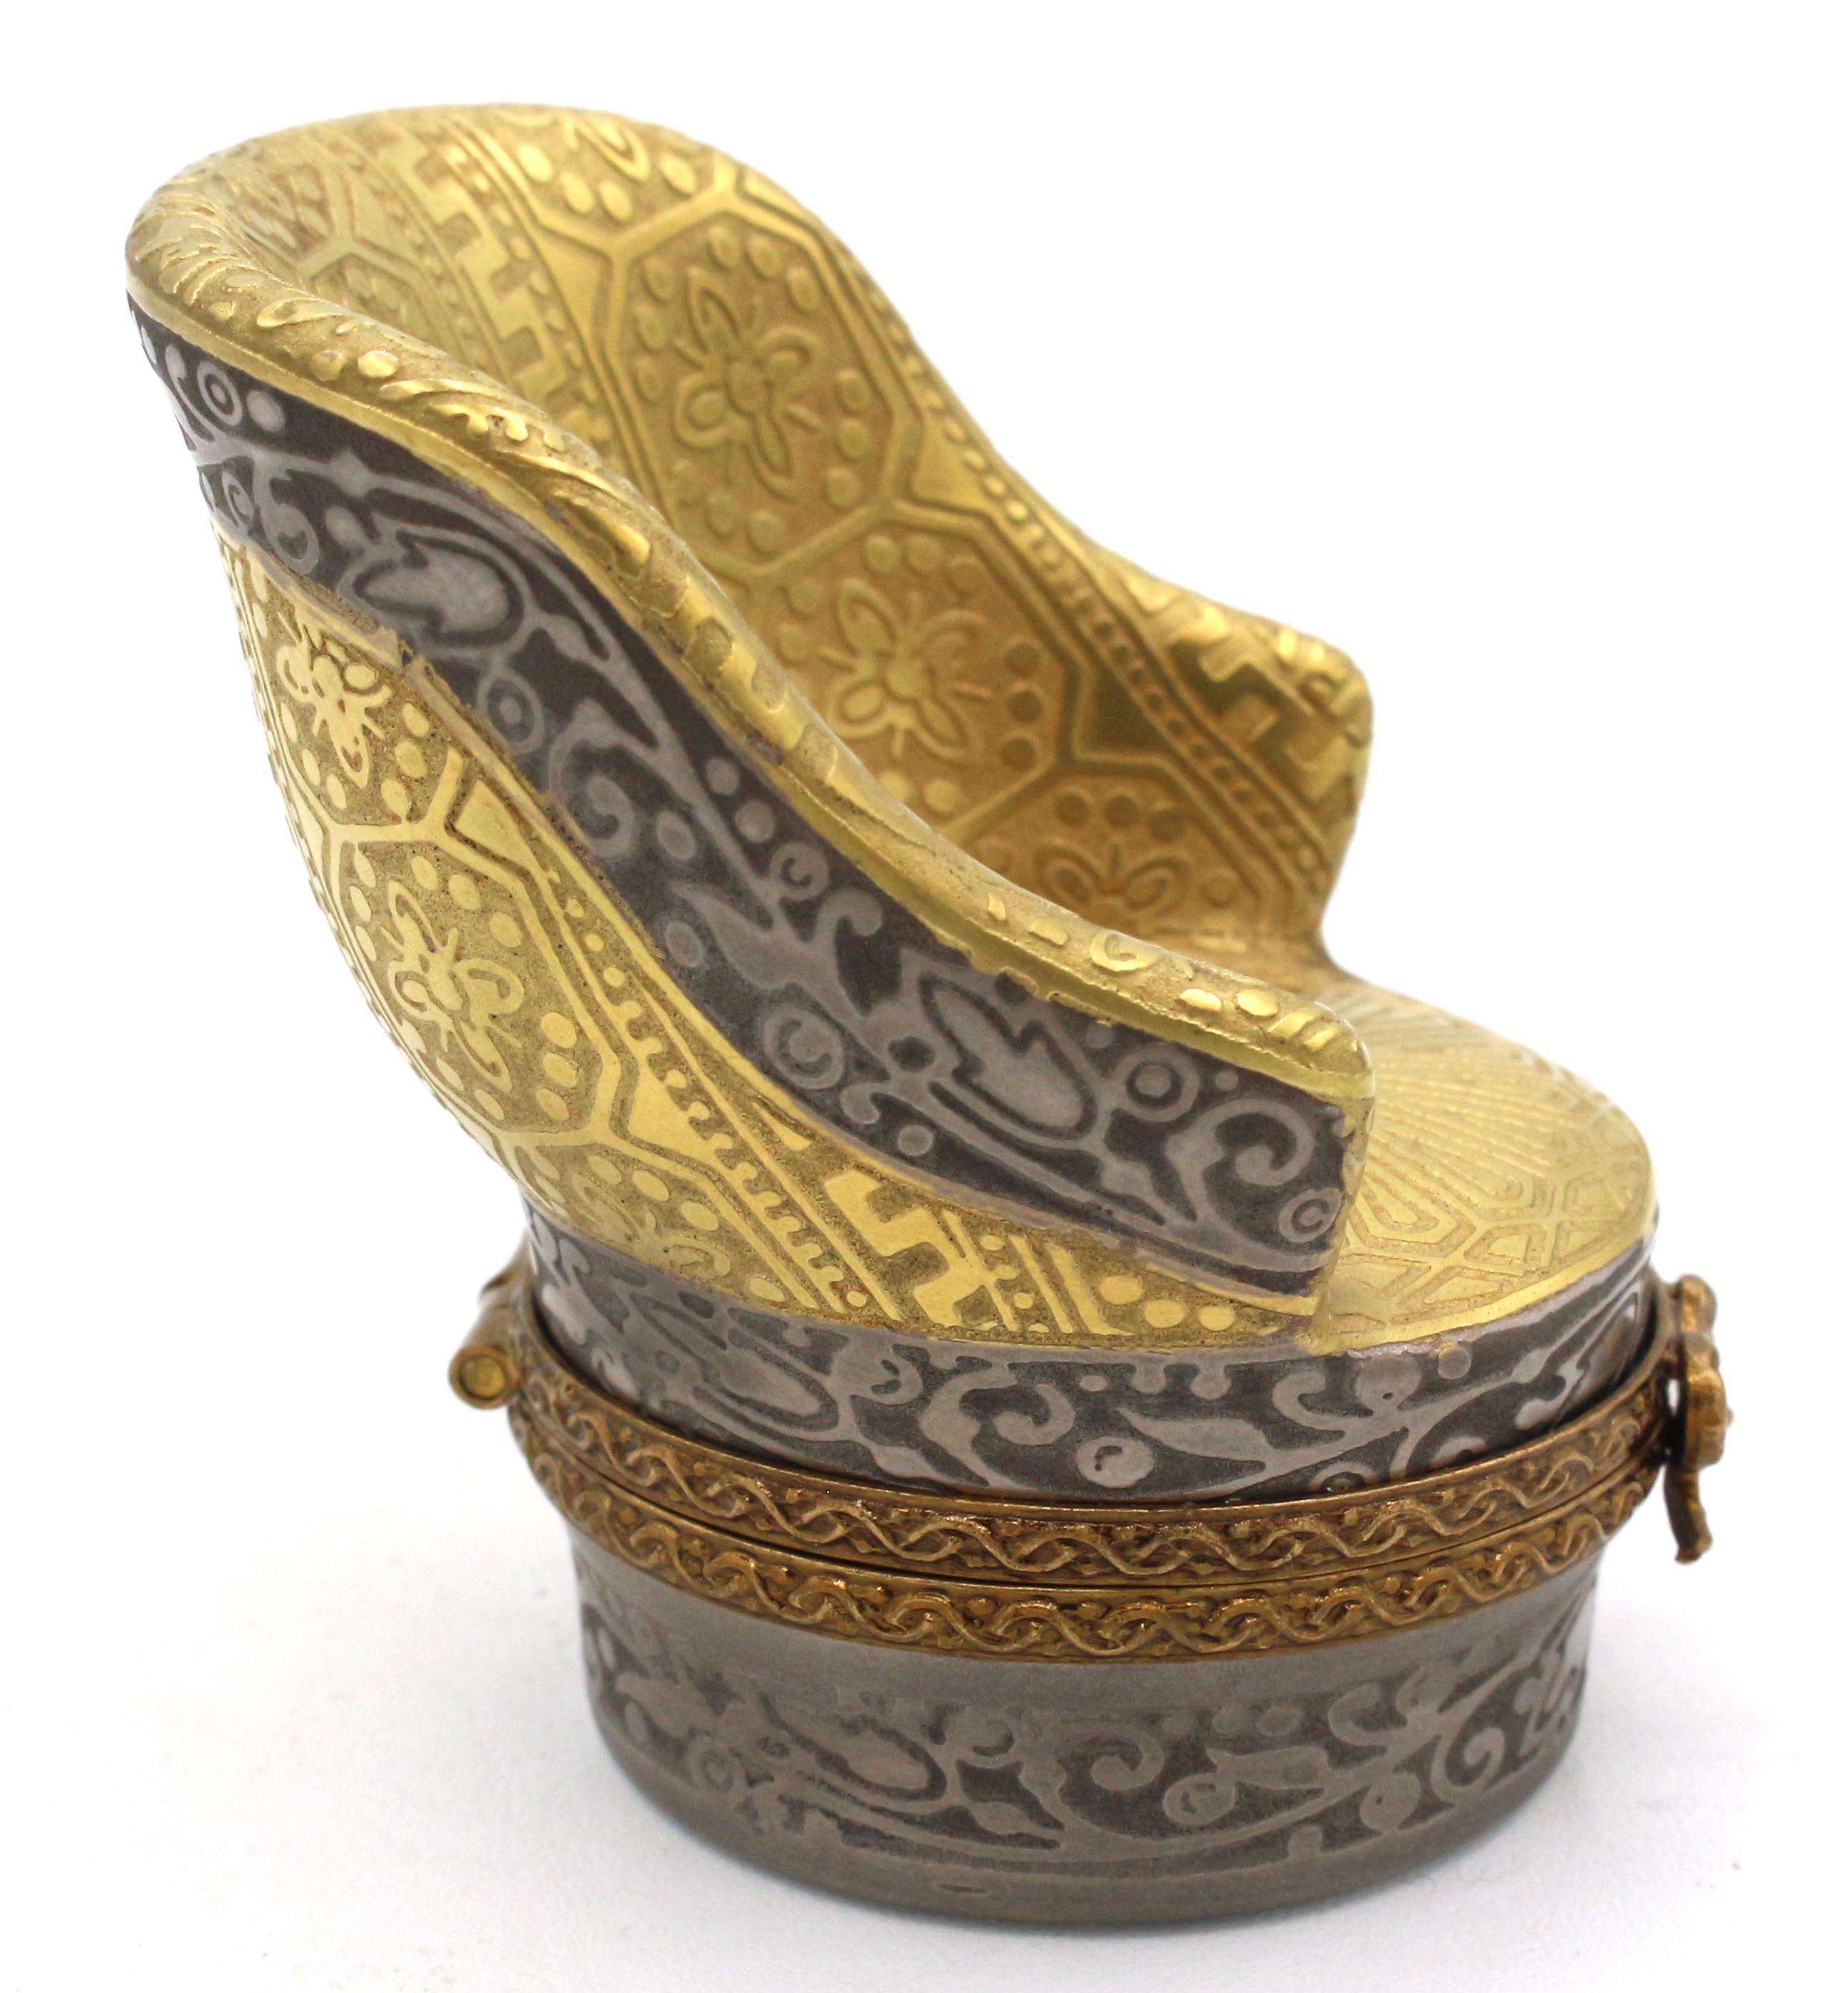 Limoges trinket or pill box in the form of a bergere chair, French later 20th century. 24k gold & silver encrused. Marked: Limoges France, Porcelaine D'Art Du Cruou, MCLS, Made in France.
1 5/8